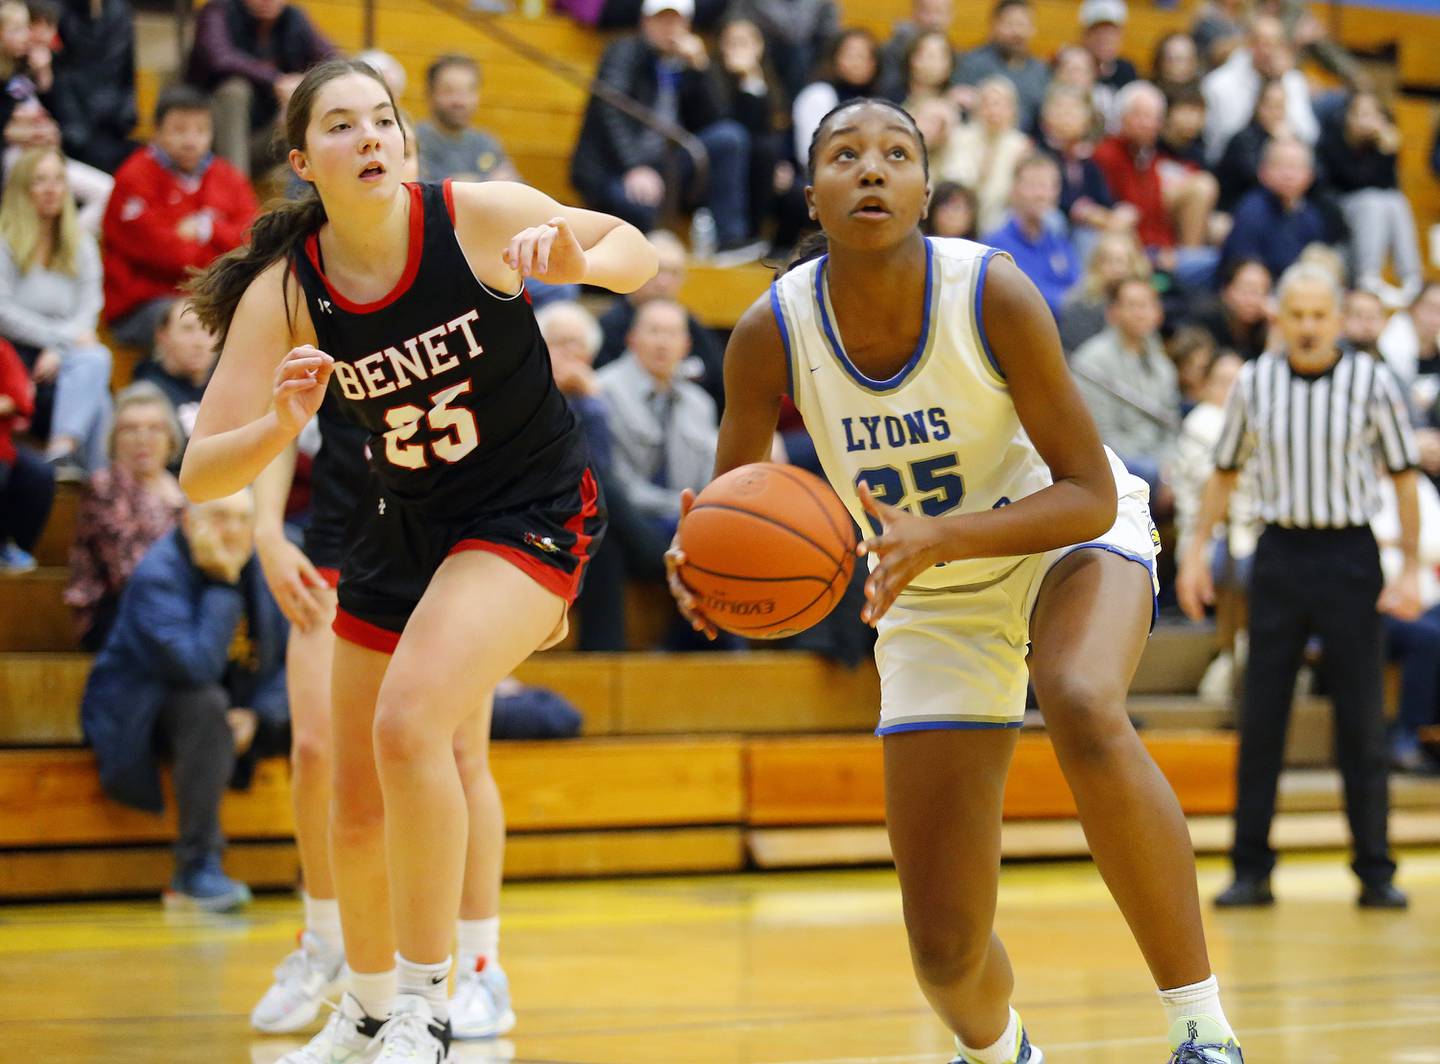 Lyons' Nora Ezike (25) drives to the basket during the girls varsity basketball game between Benet Academy and Lyons Township on Wednesday, Nov. 30, 2022 in LaGrange, IL.